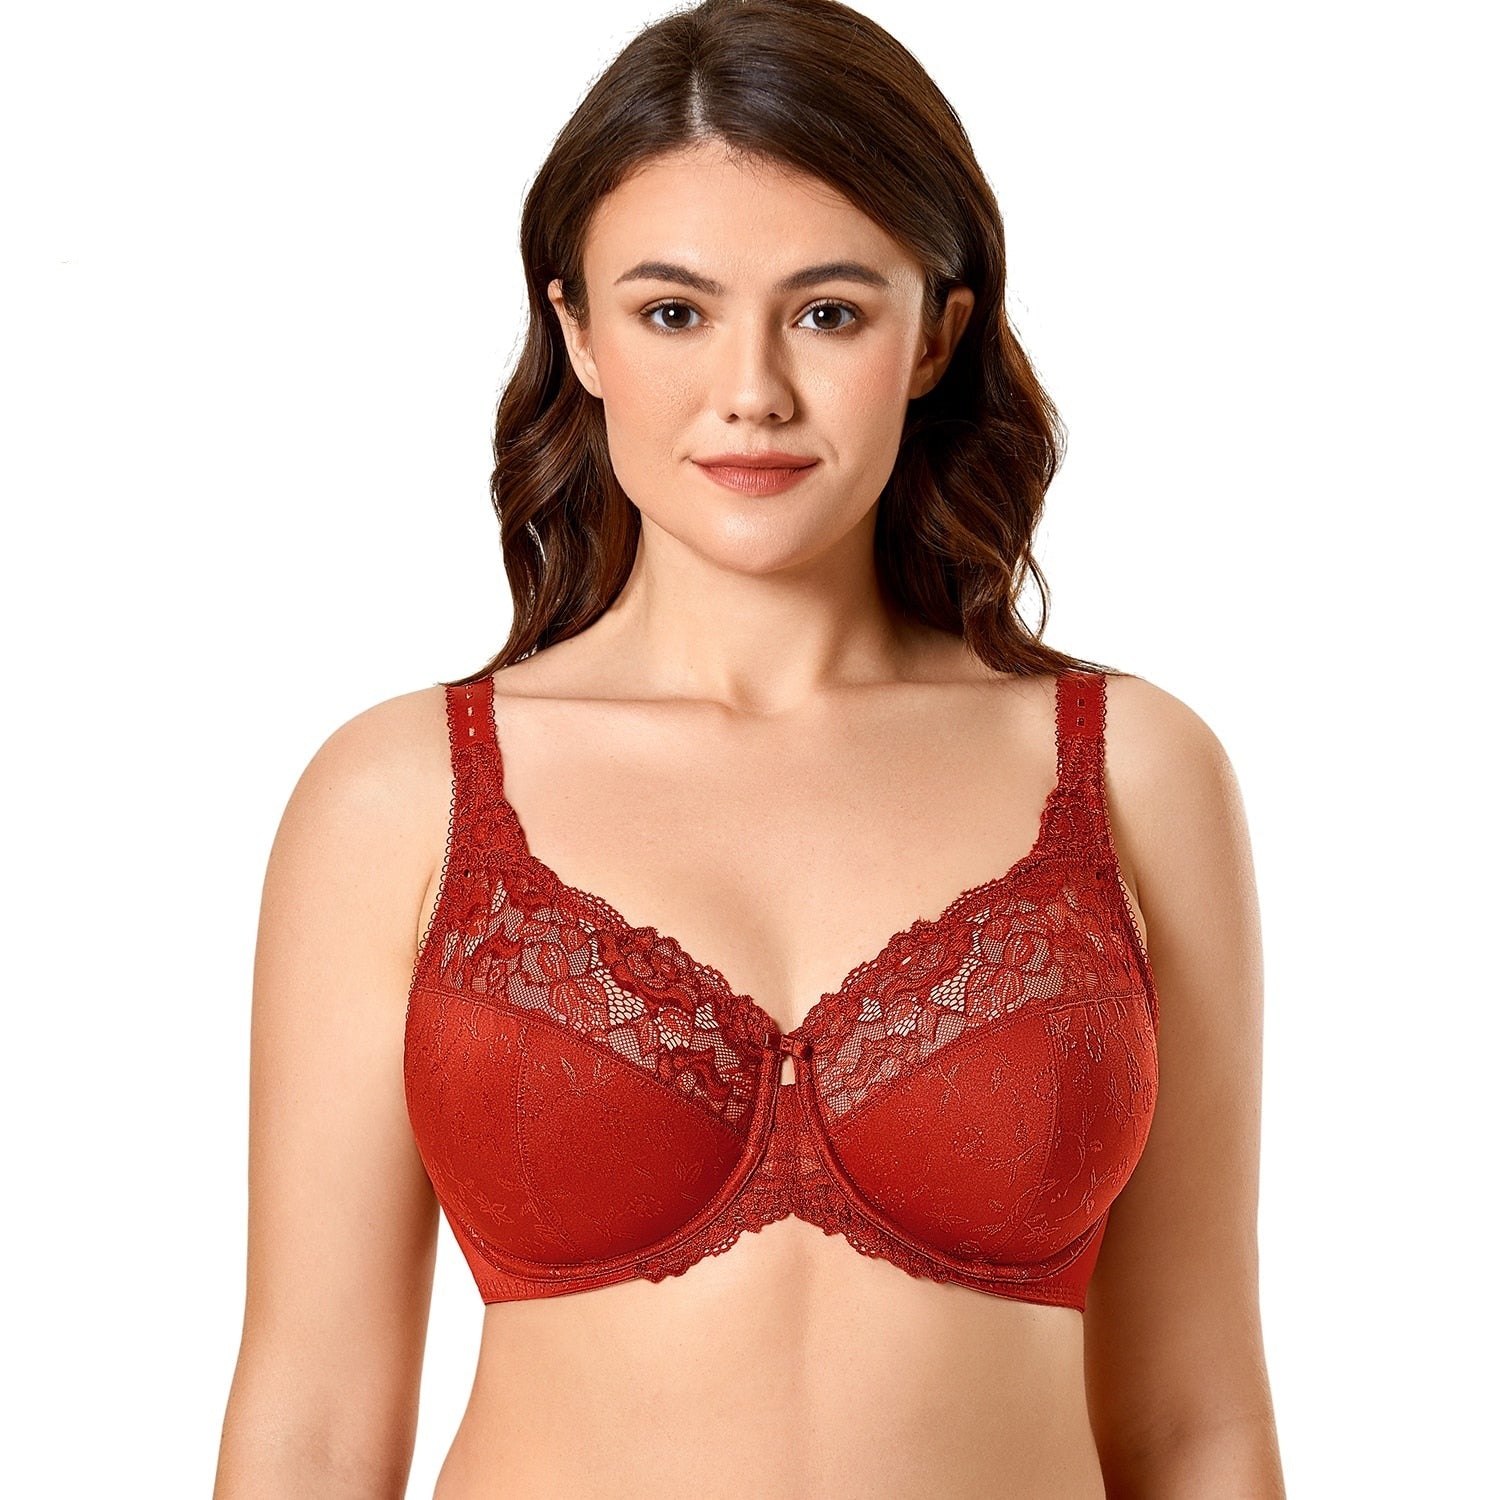 Shop for Size 36, Red, Lingerie